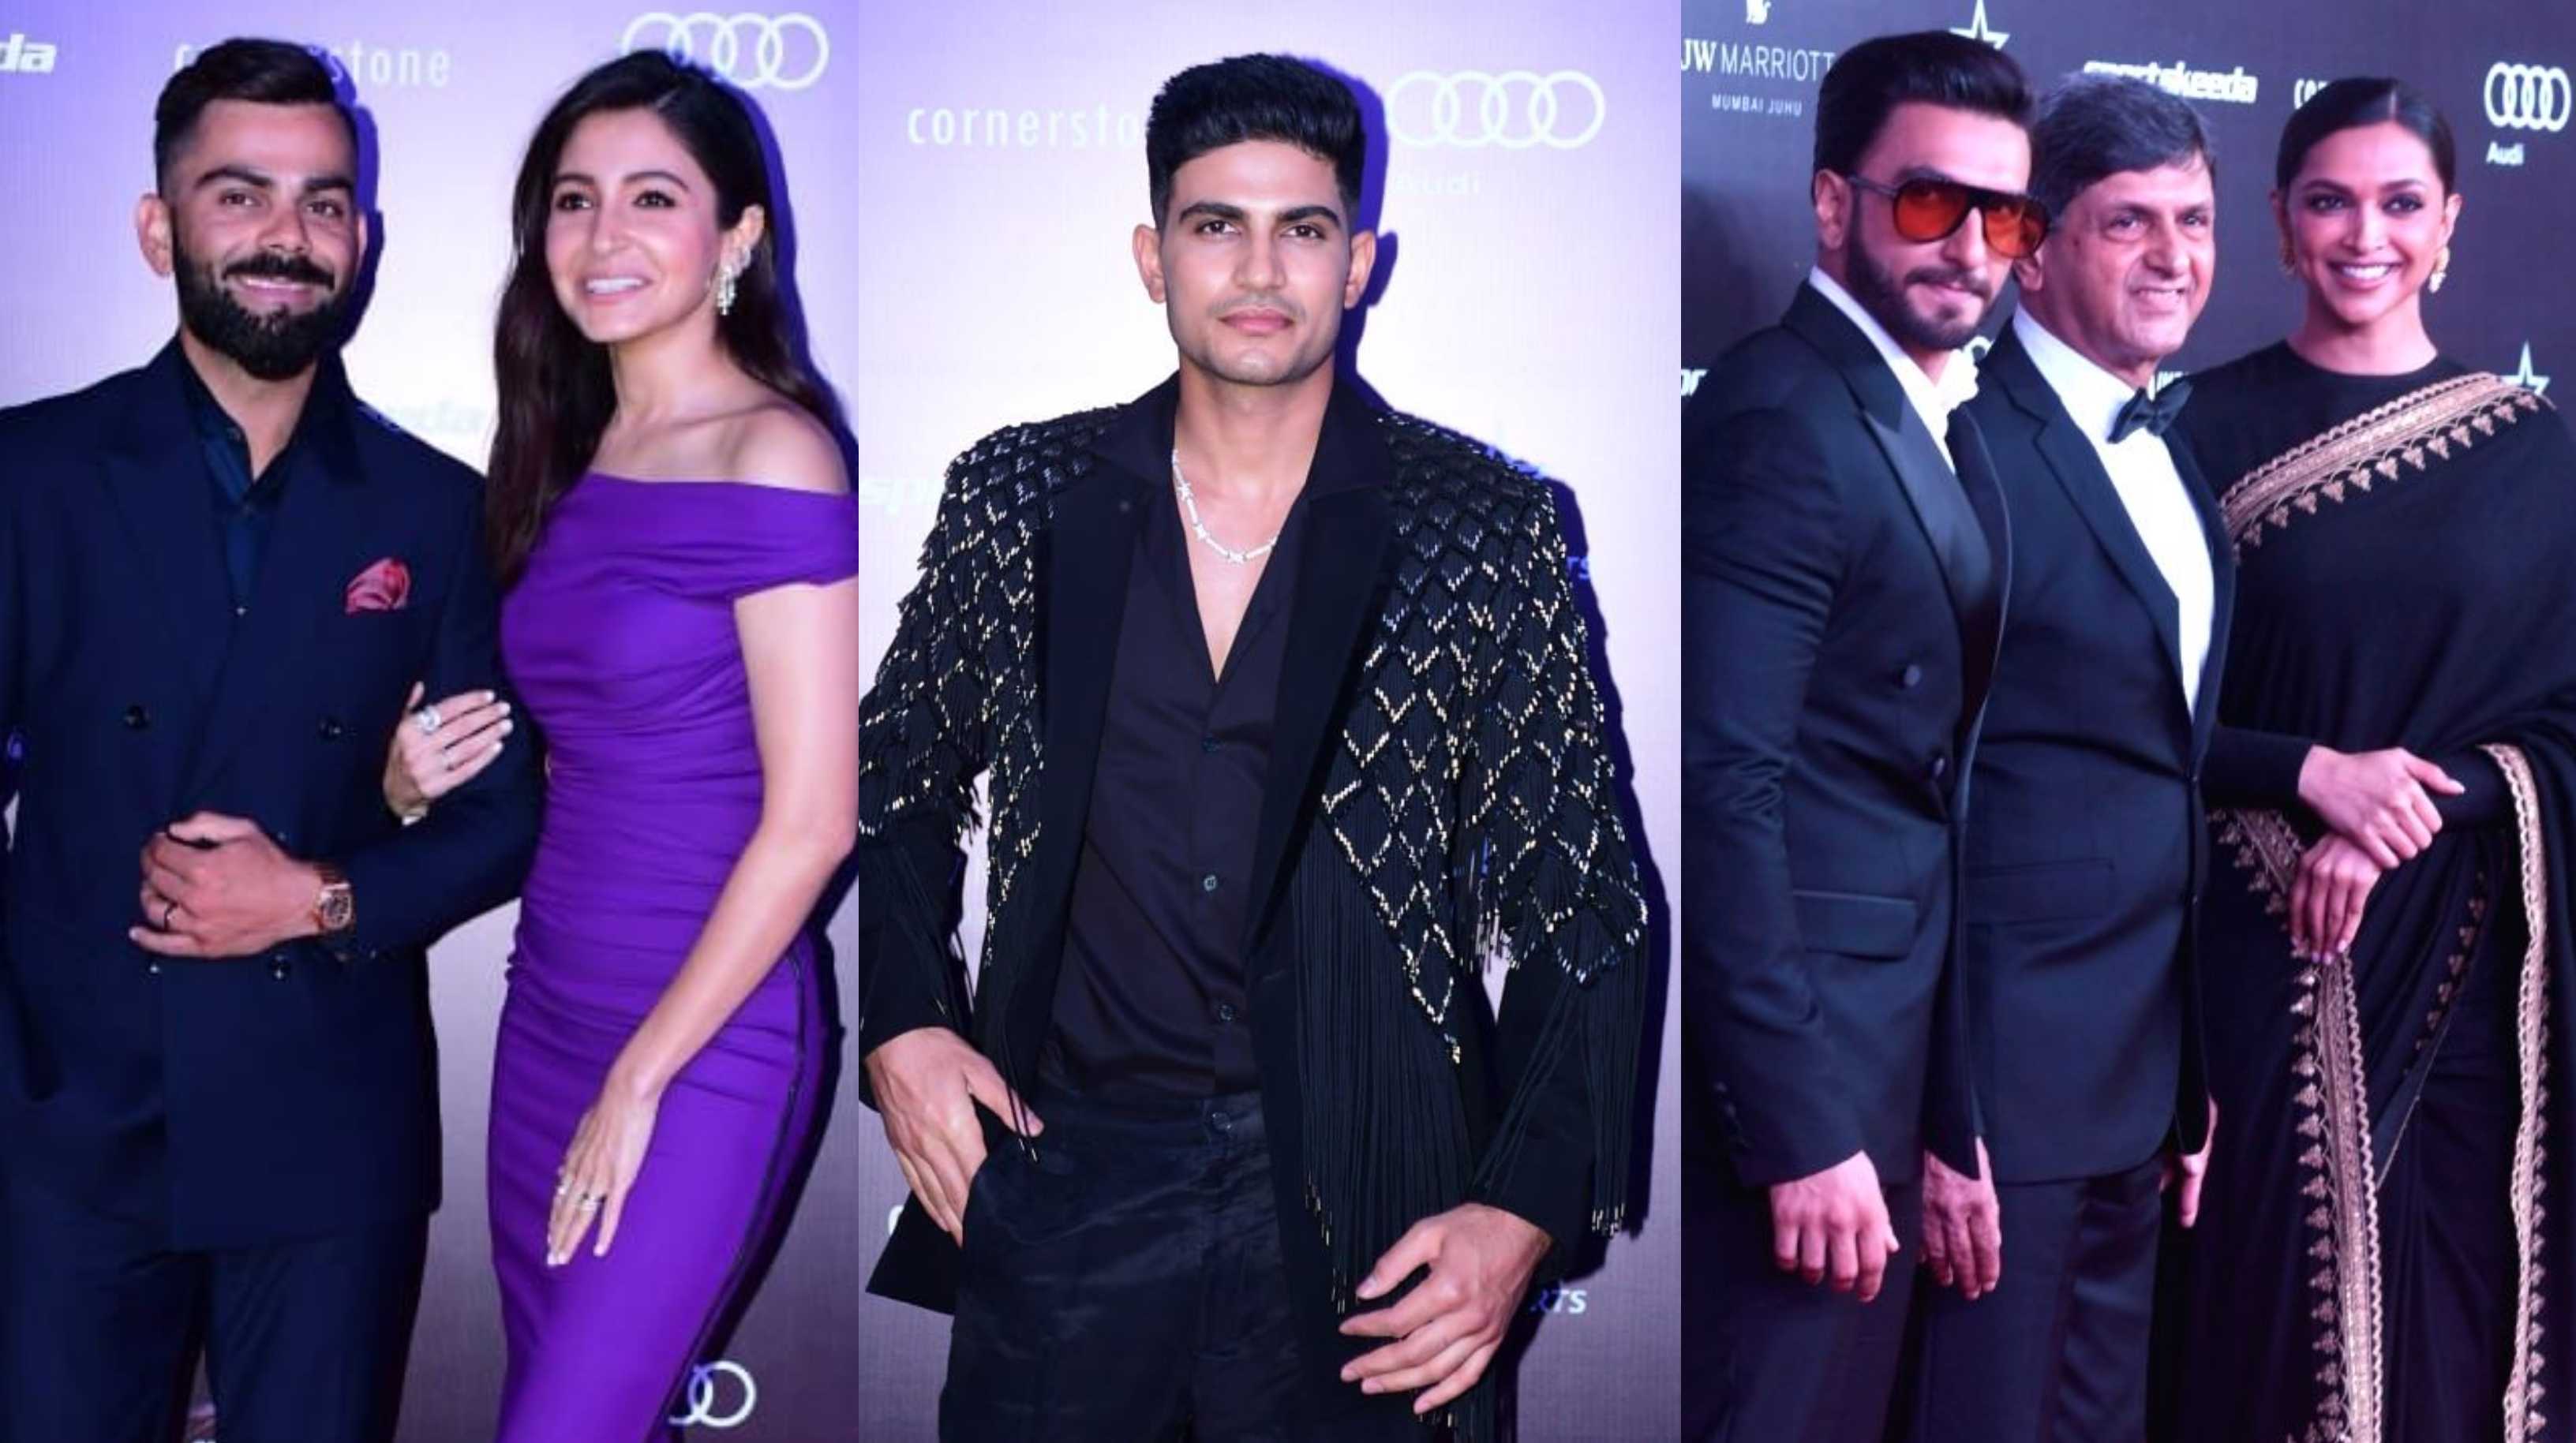 From Virat Kohli and Anushka Sharma to Shubman Gill, these celebs brought their A-game to the red carpet last night